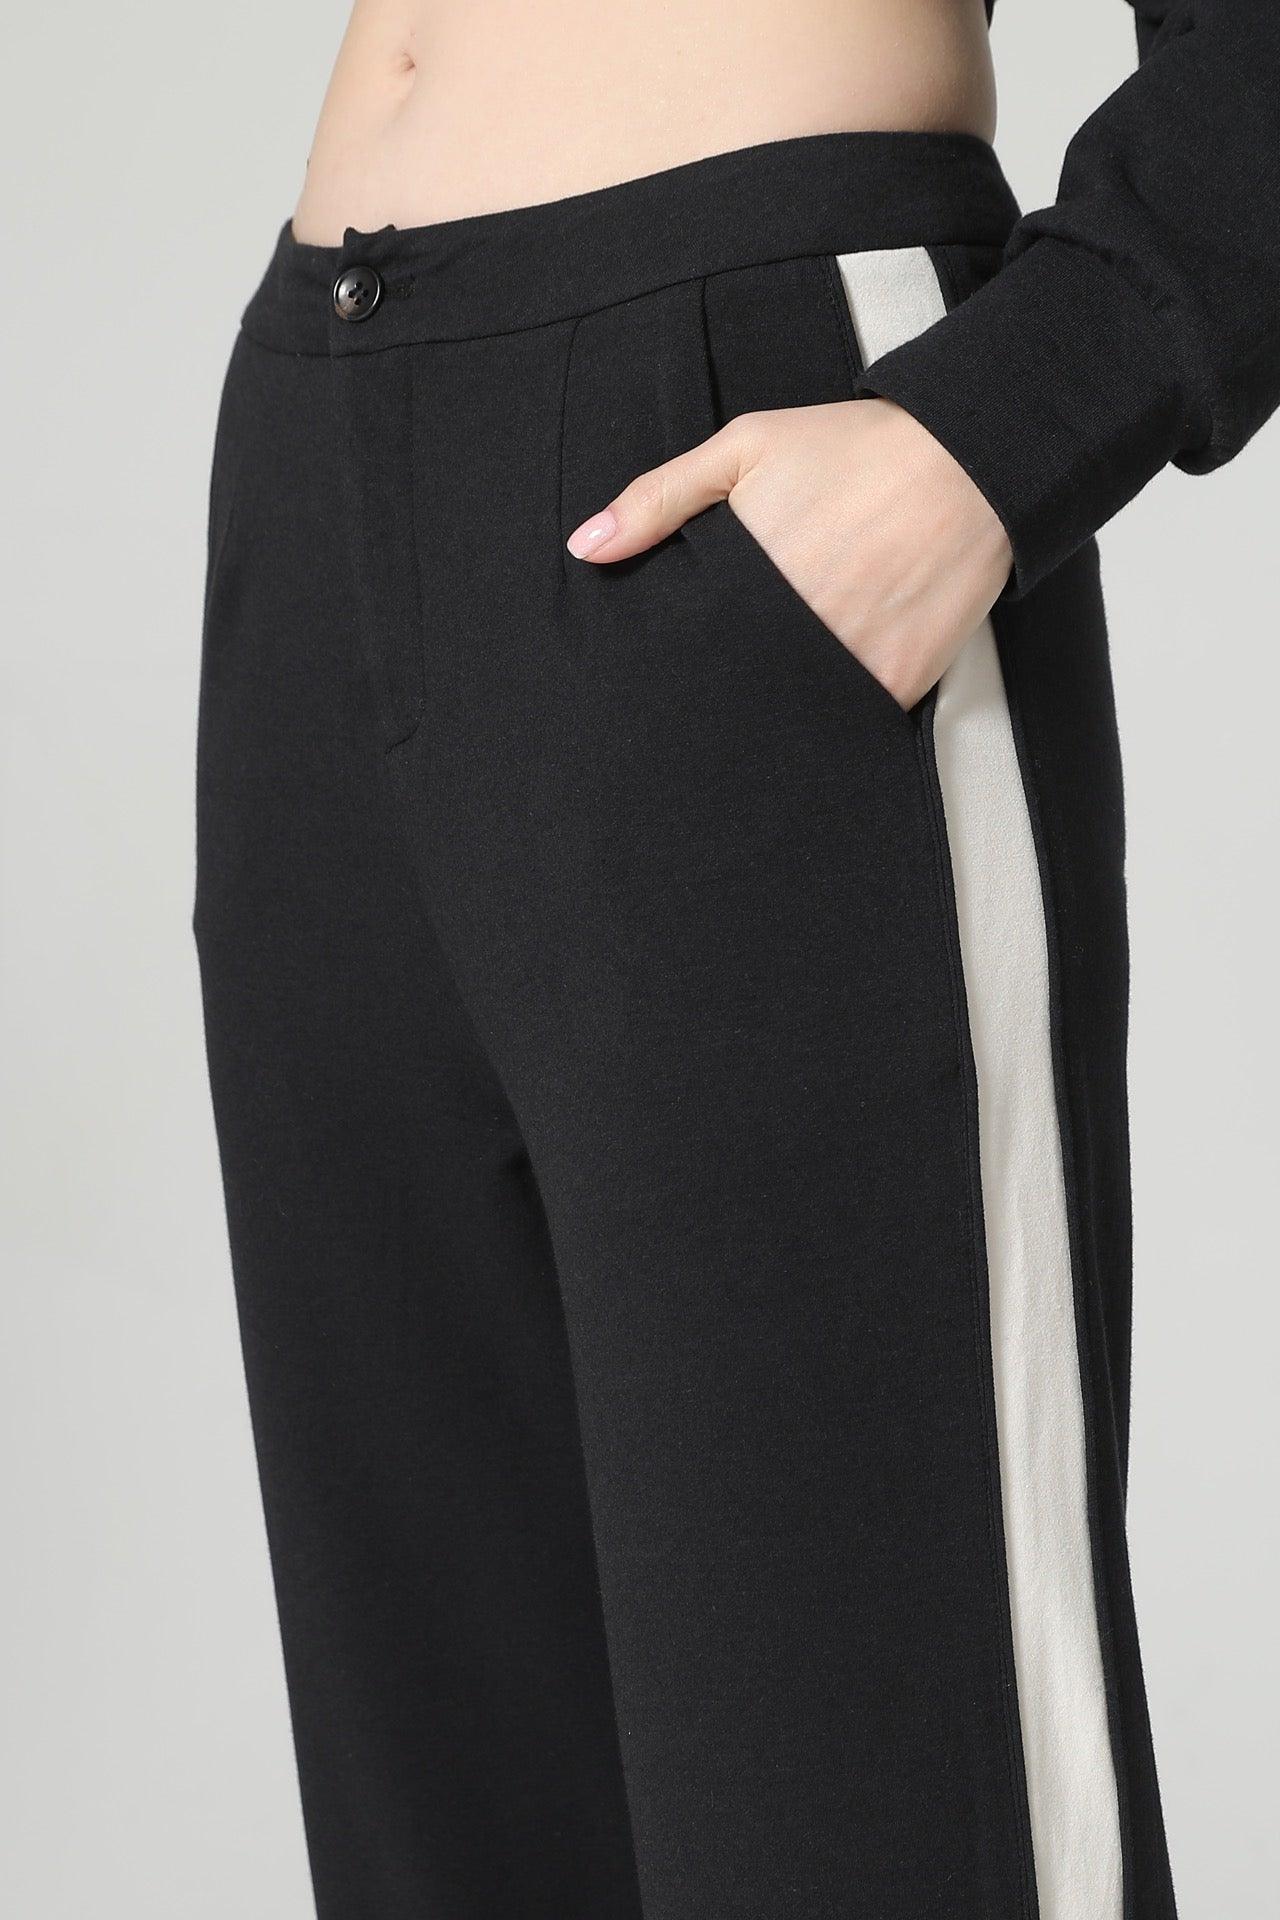 Women&#39;s Bamboo Side Lined Sweatpants - NOT LABELED